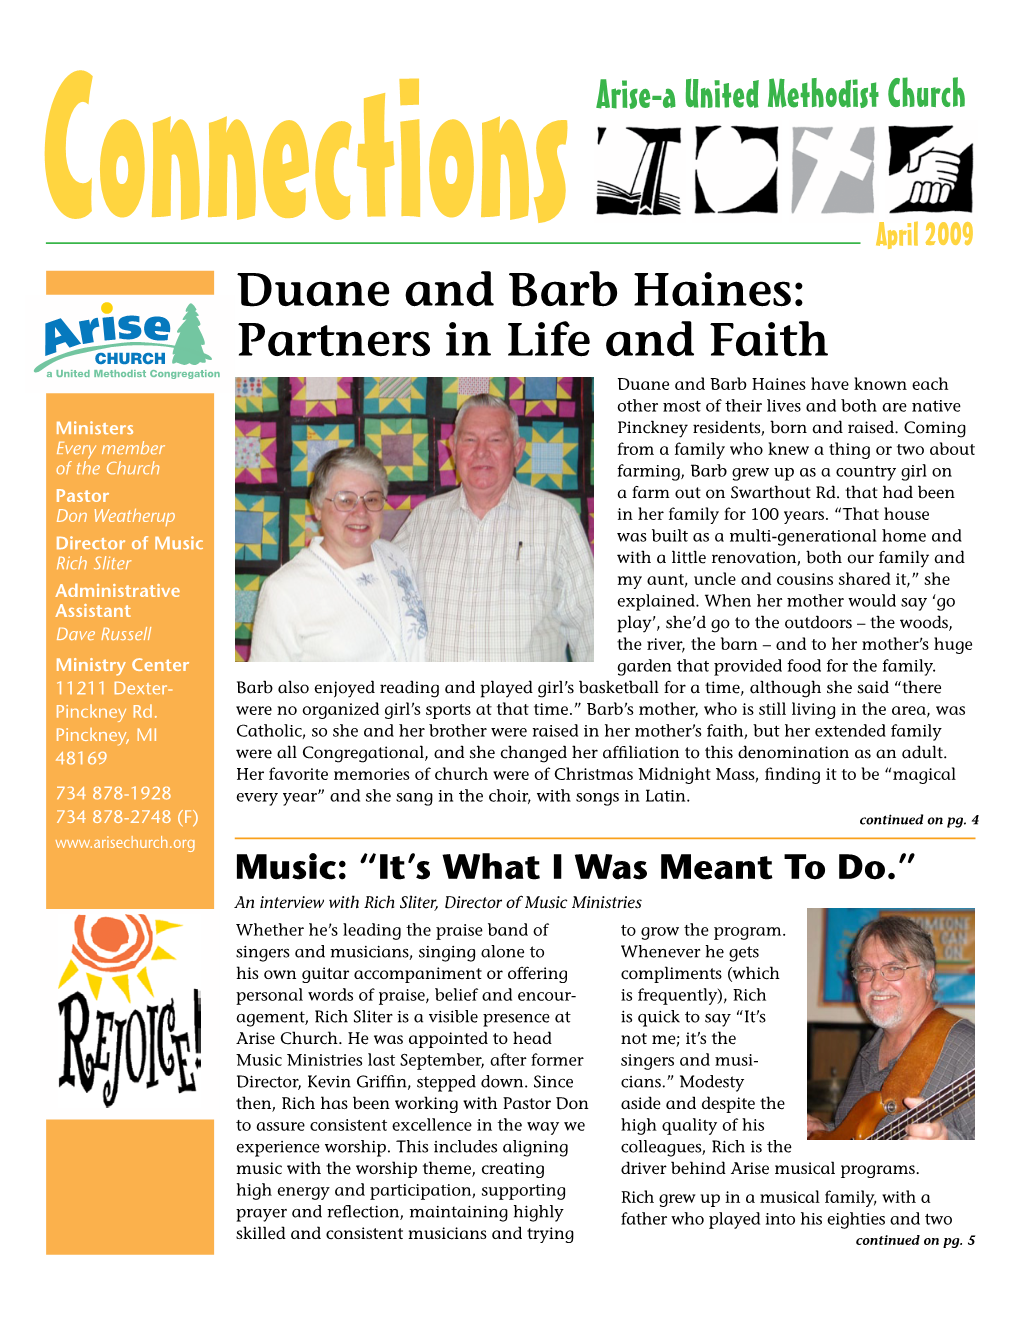 Duane and Barb Haines: Partners in Life and Faith